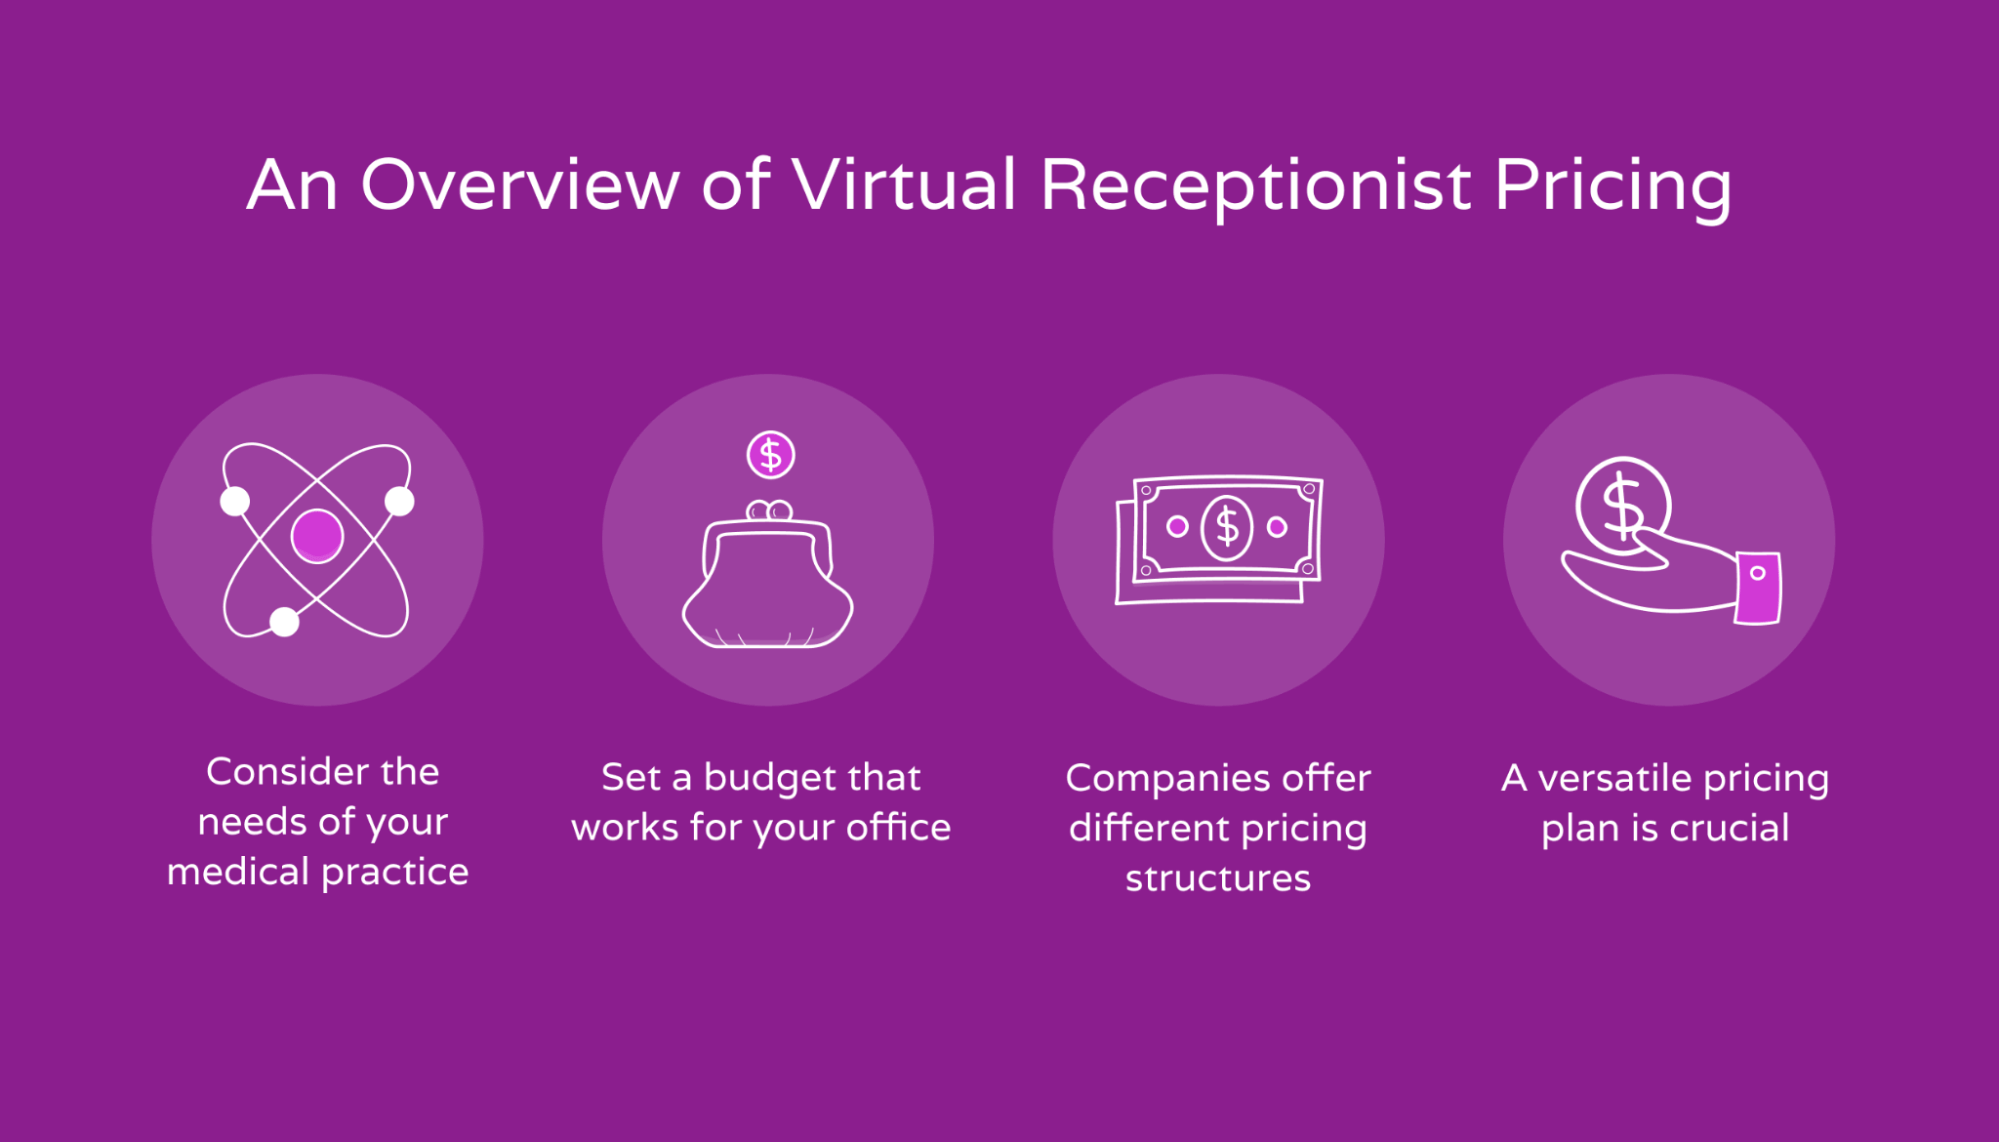 Factors that can affect virtual receptionist pricing.